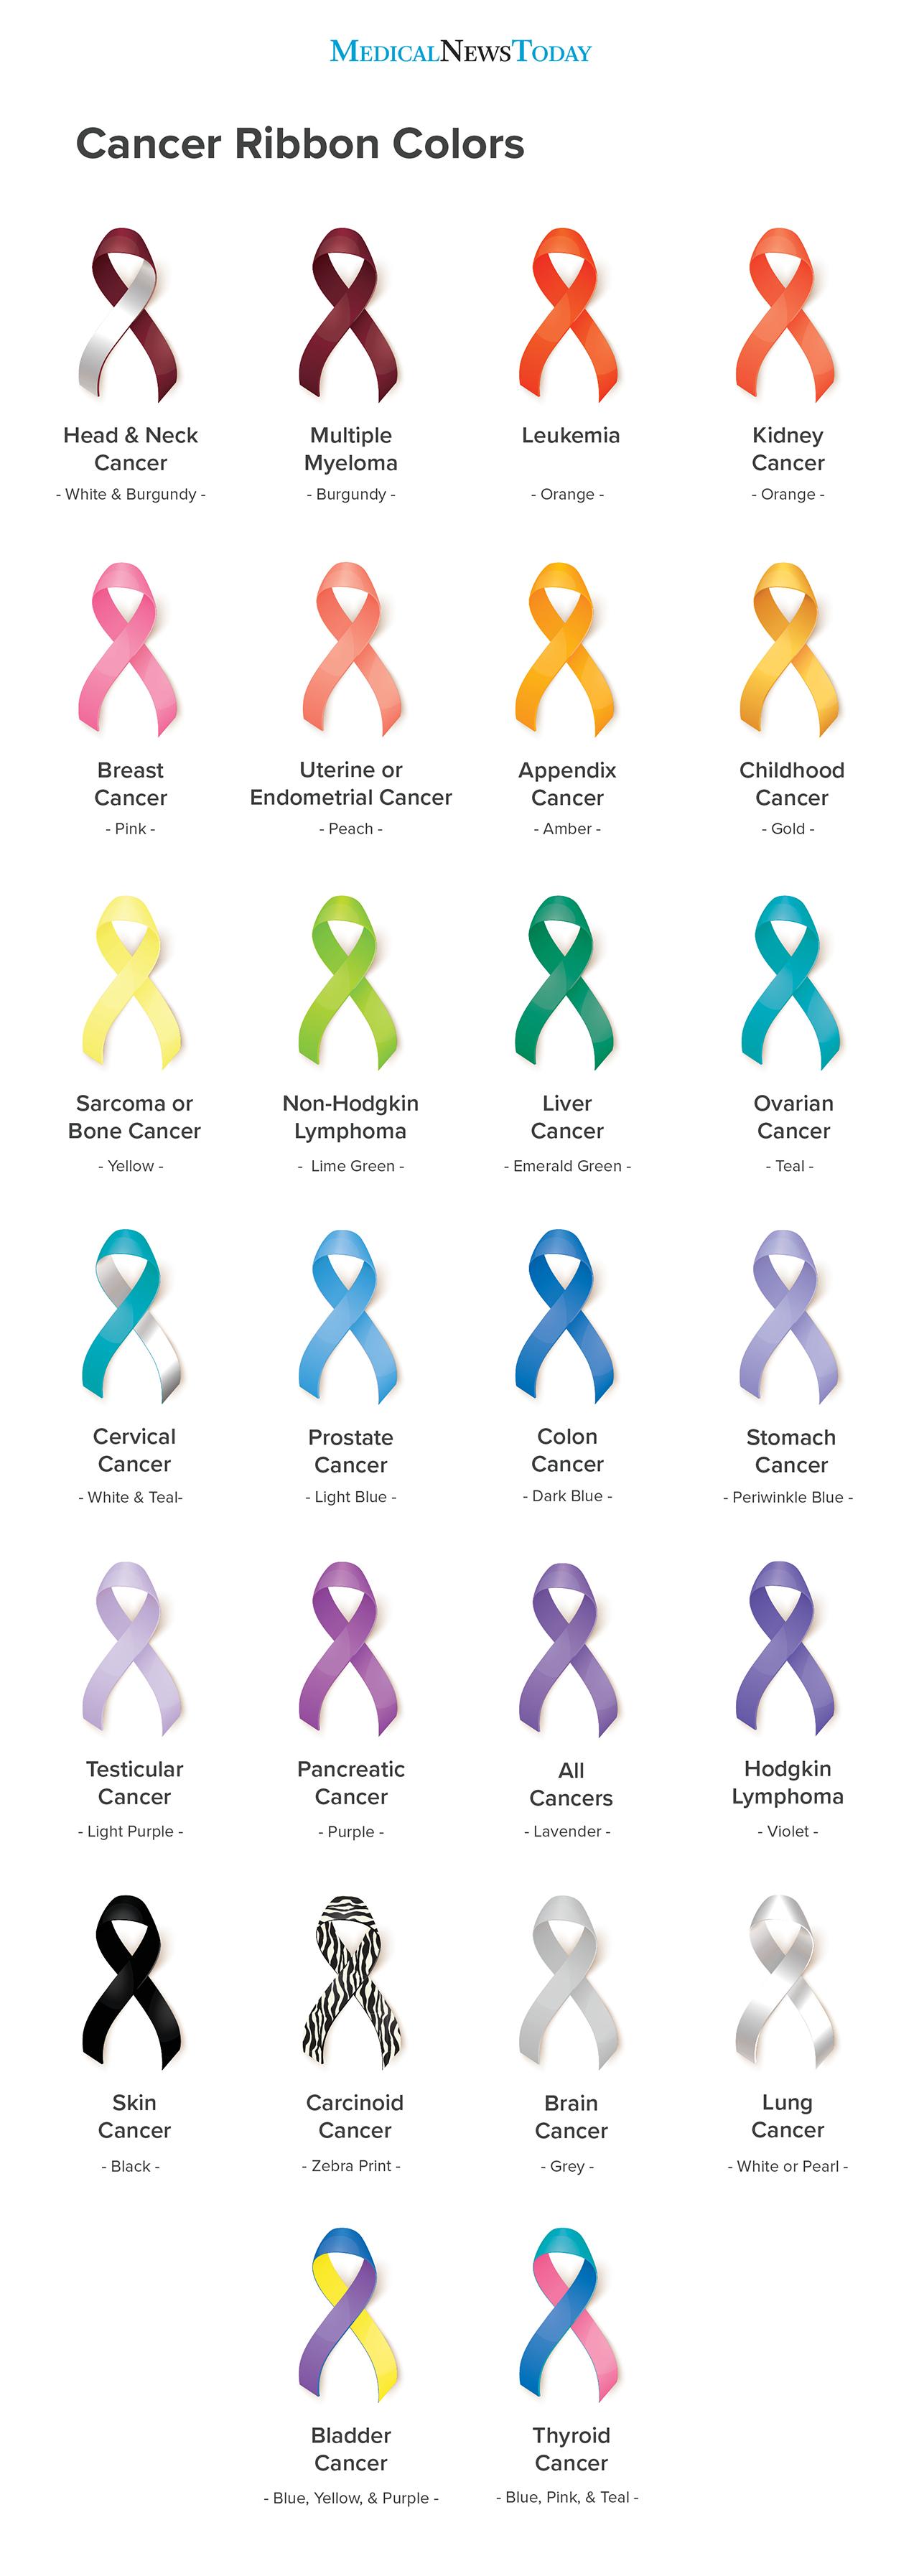 Cancer ribbon colors infographic version 2 <br />Image credit: Stephen Kelly, 2018</br>